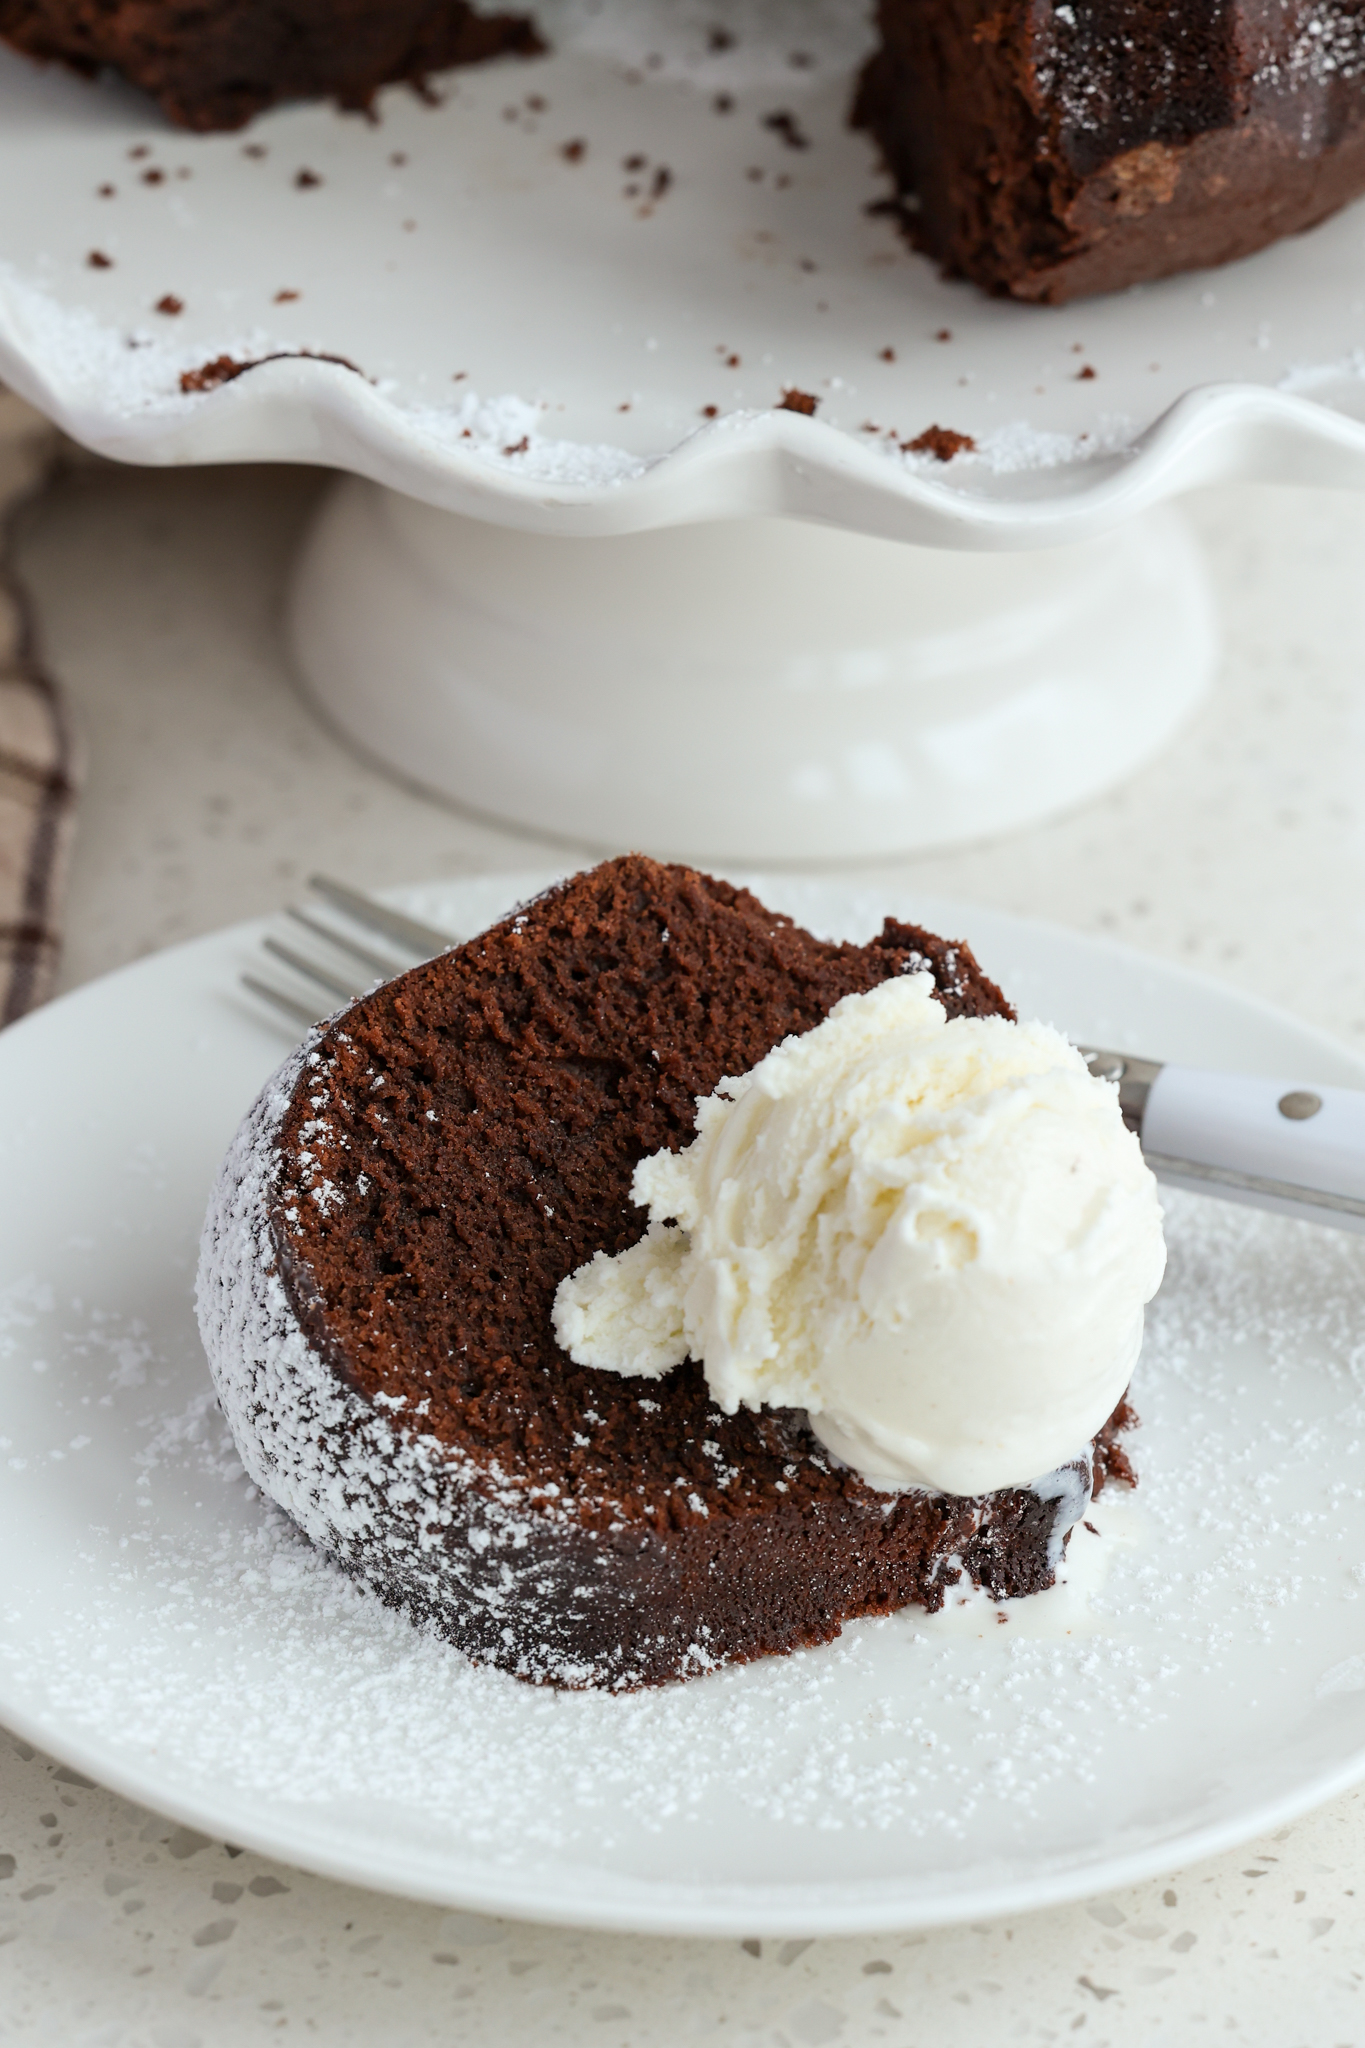 You should cocoa: sumptuous recipes for chocolate cakes and brownies | Food  | The Guardian